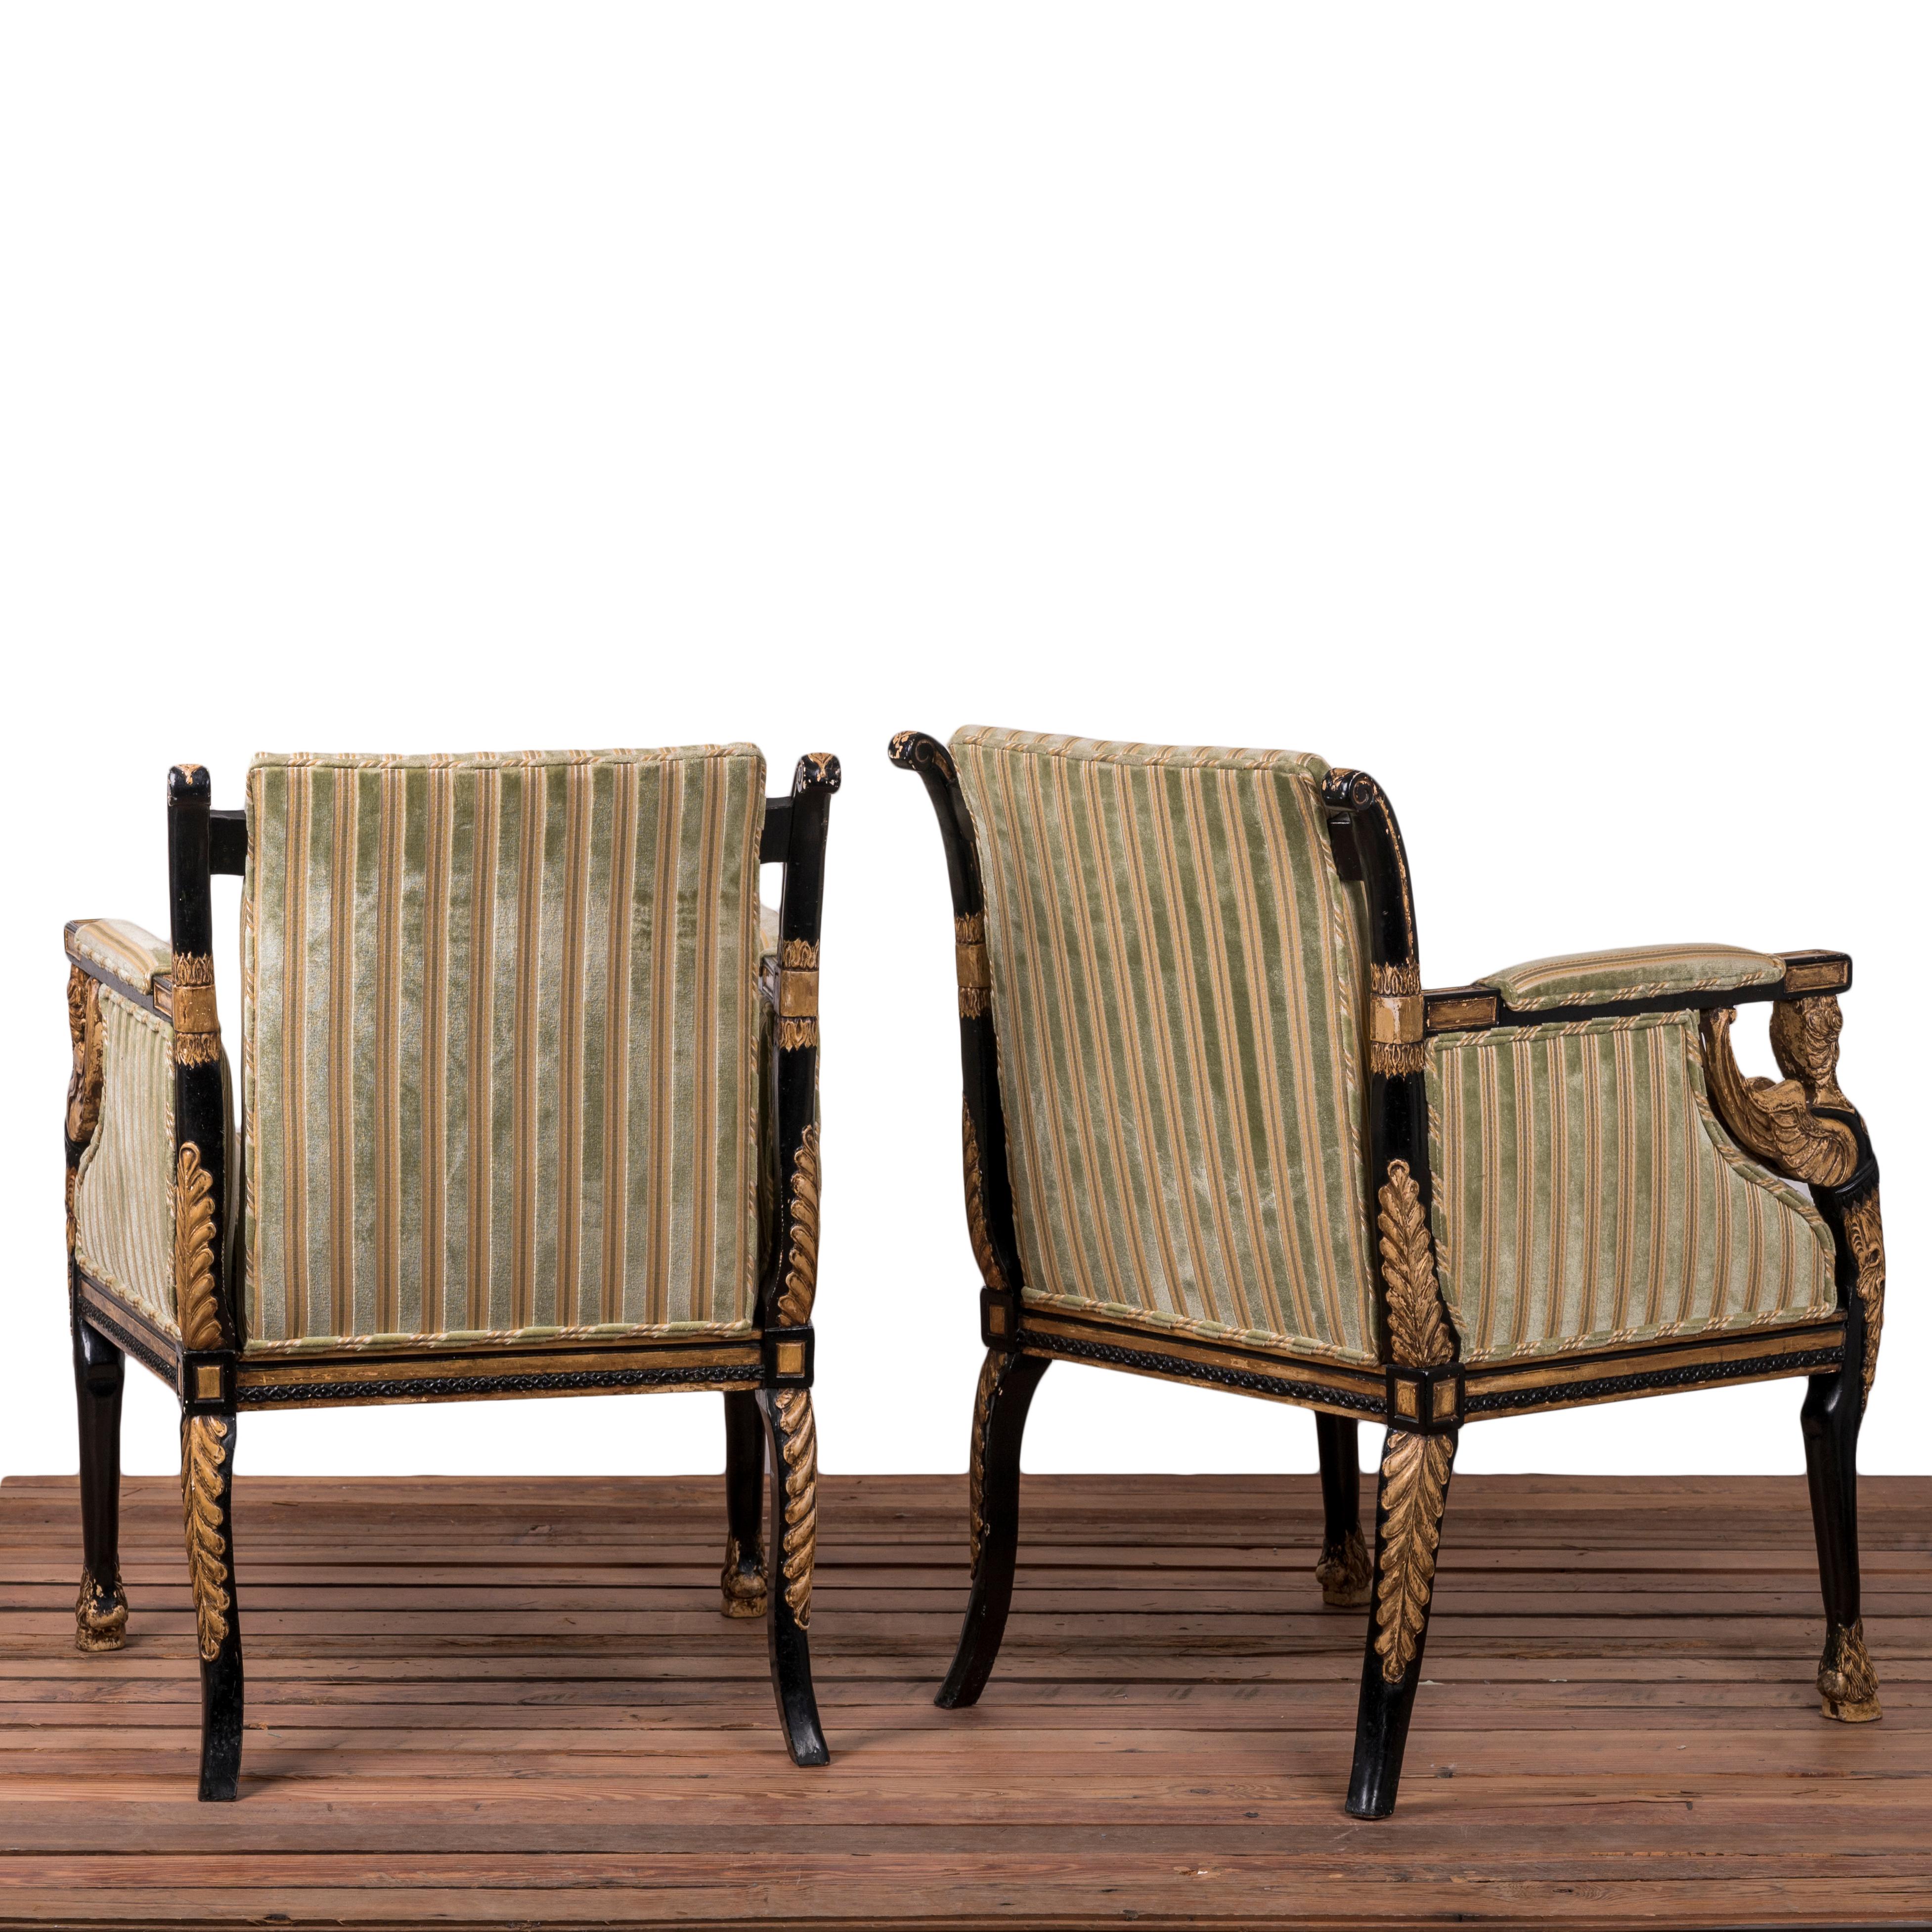 Upholstery English Regency Style Ebonized and Parcel Gilt Chairs - A Pair For Sale